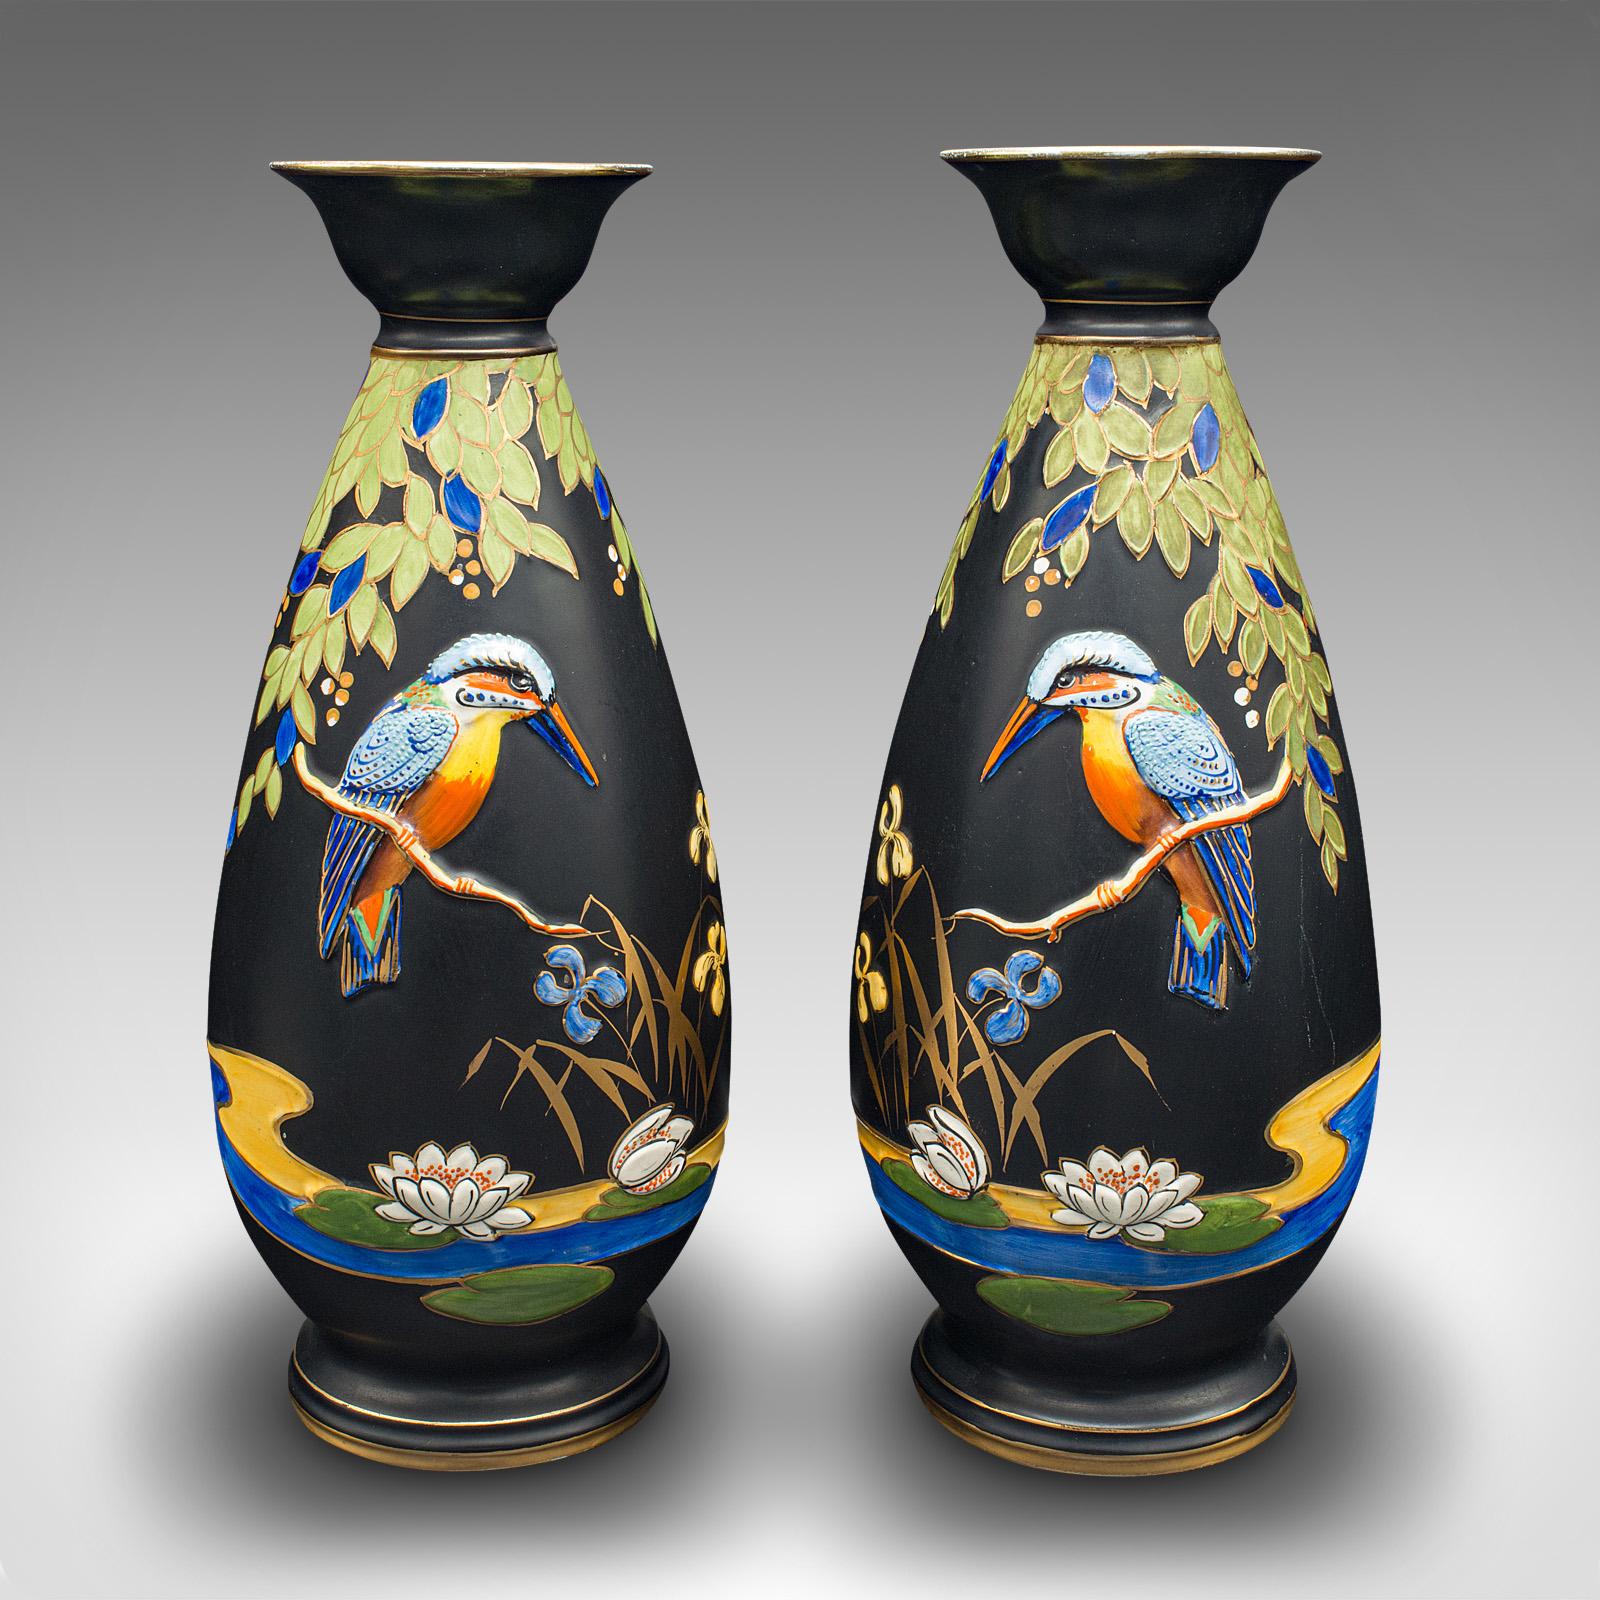 This is a pair of vintage display vases. An English, satin finished vase with kingfisher decor, dating to the Art Deco period, circa 1930.

Beautifully presented vases graced with appealing colour and finish
Displaying a desirable aged patina and in